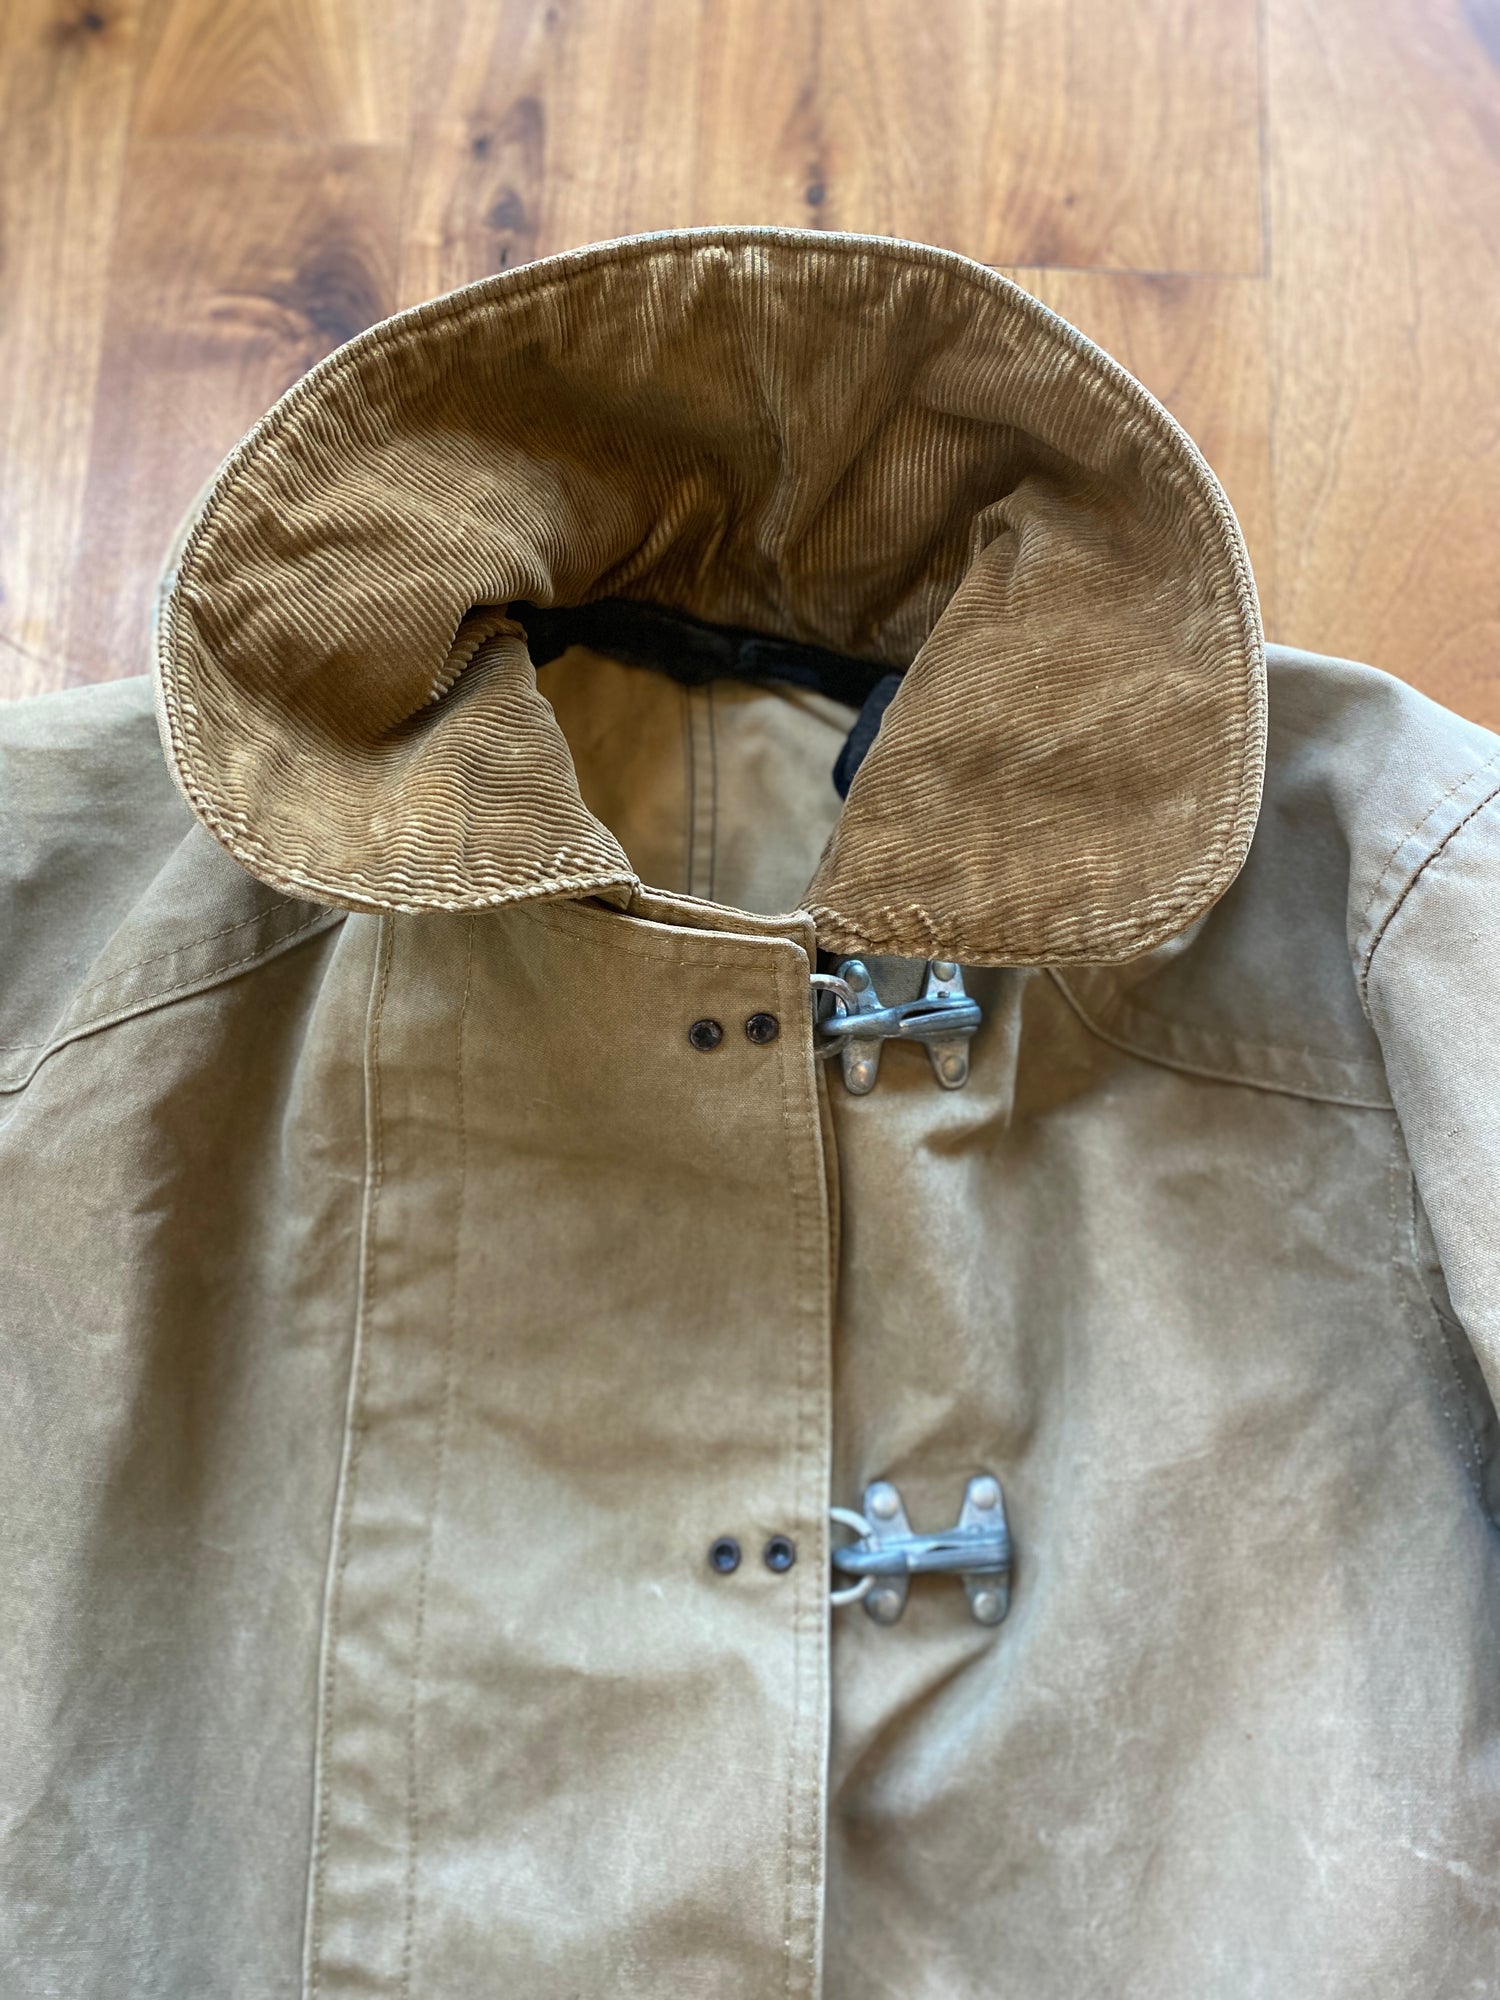 1950s Janesville Apparel Union Made Fire Coat Size 44 – Western